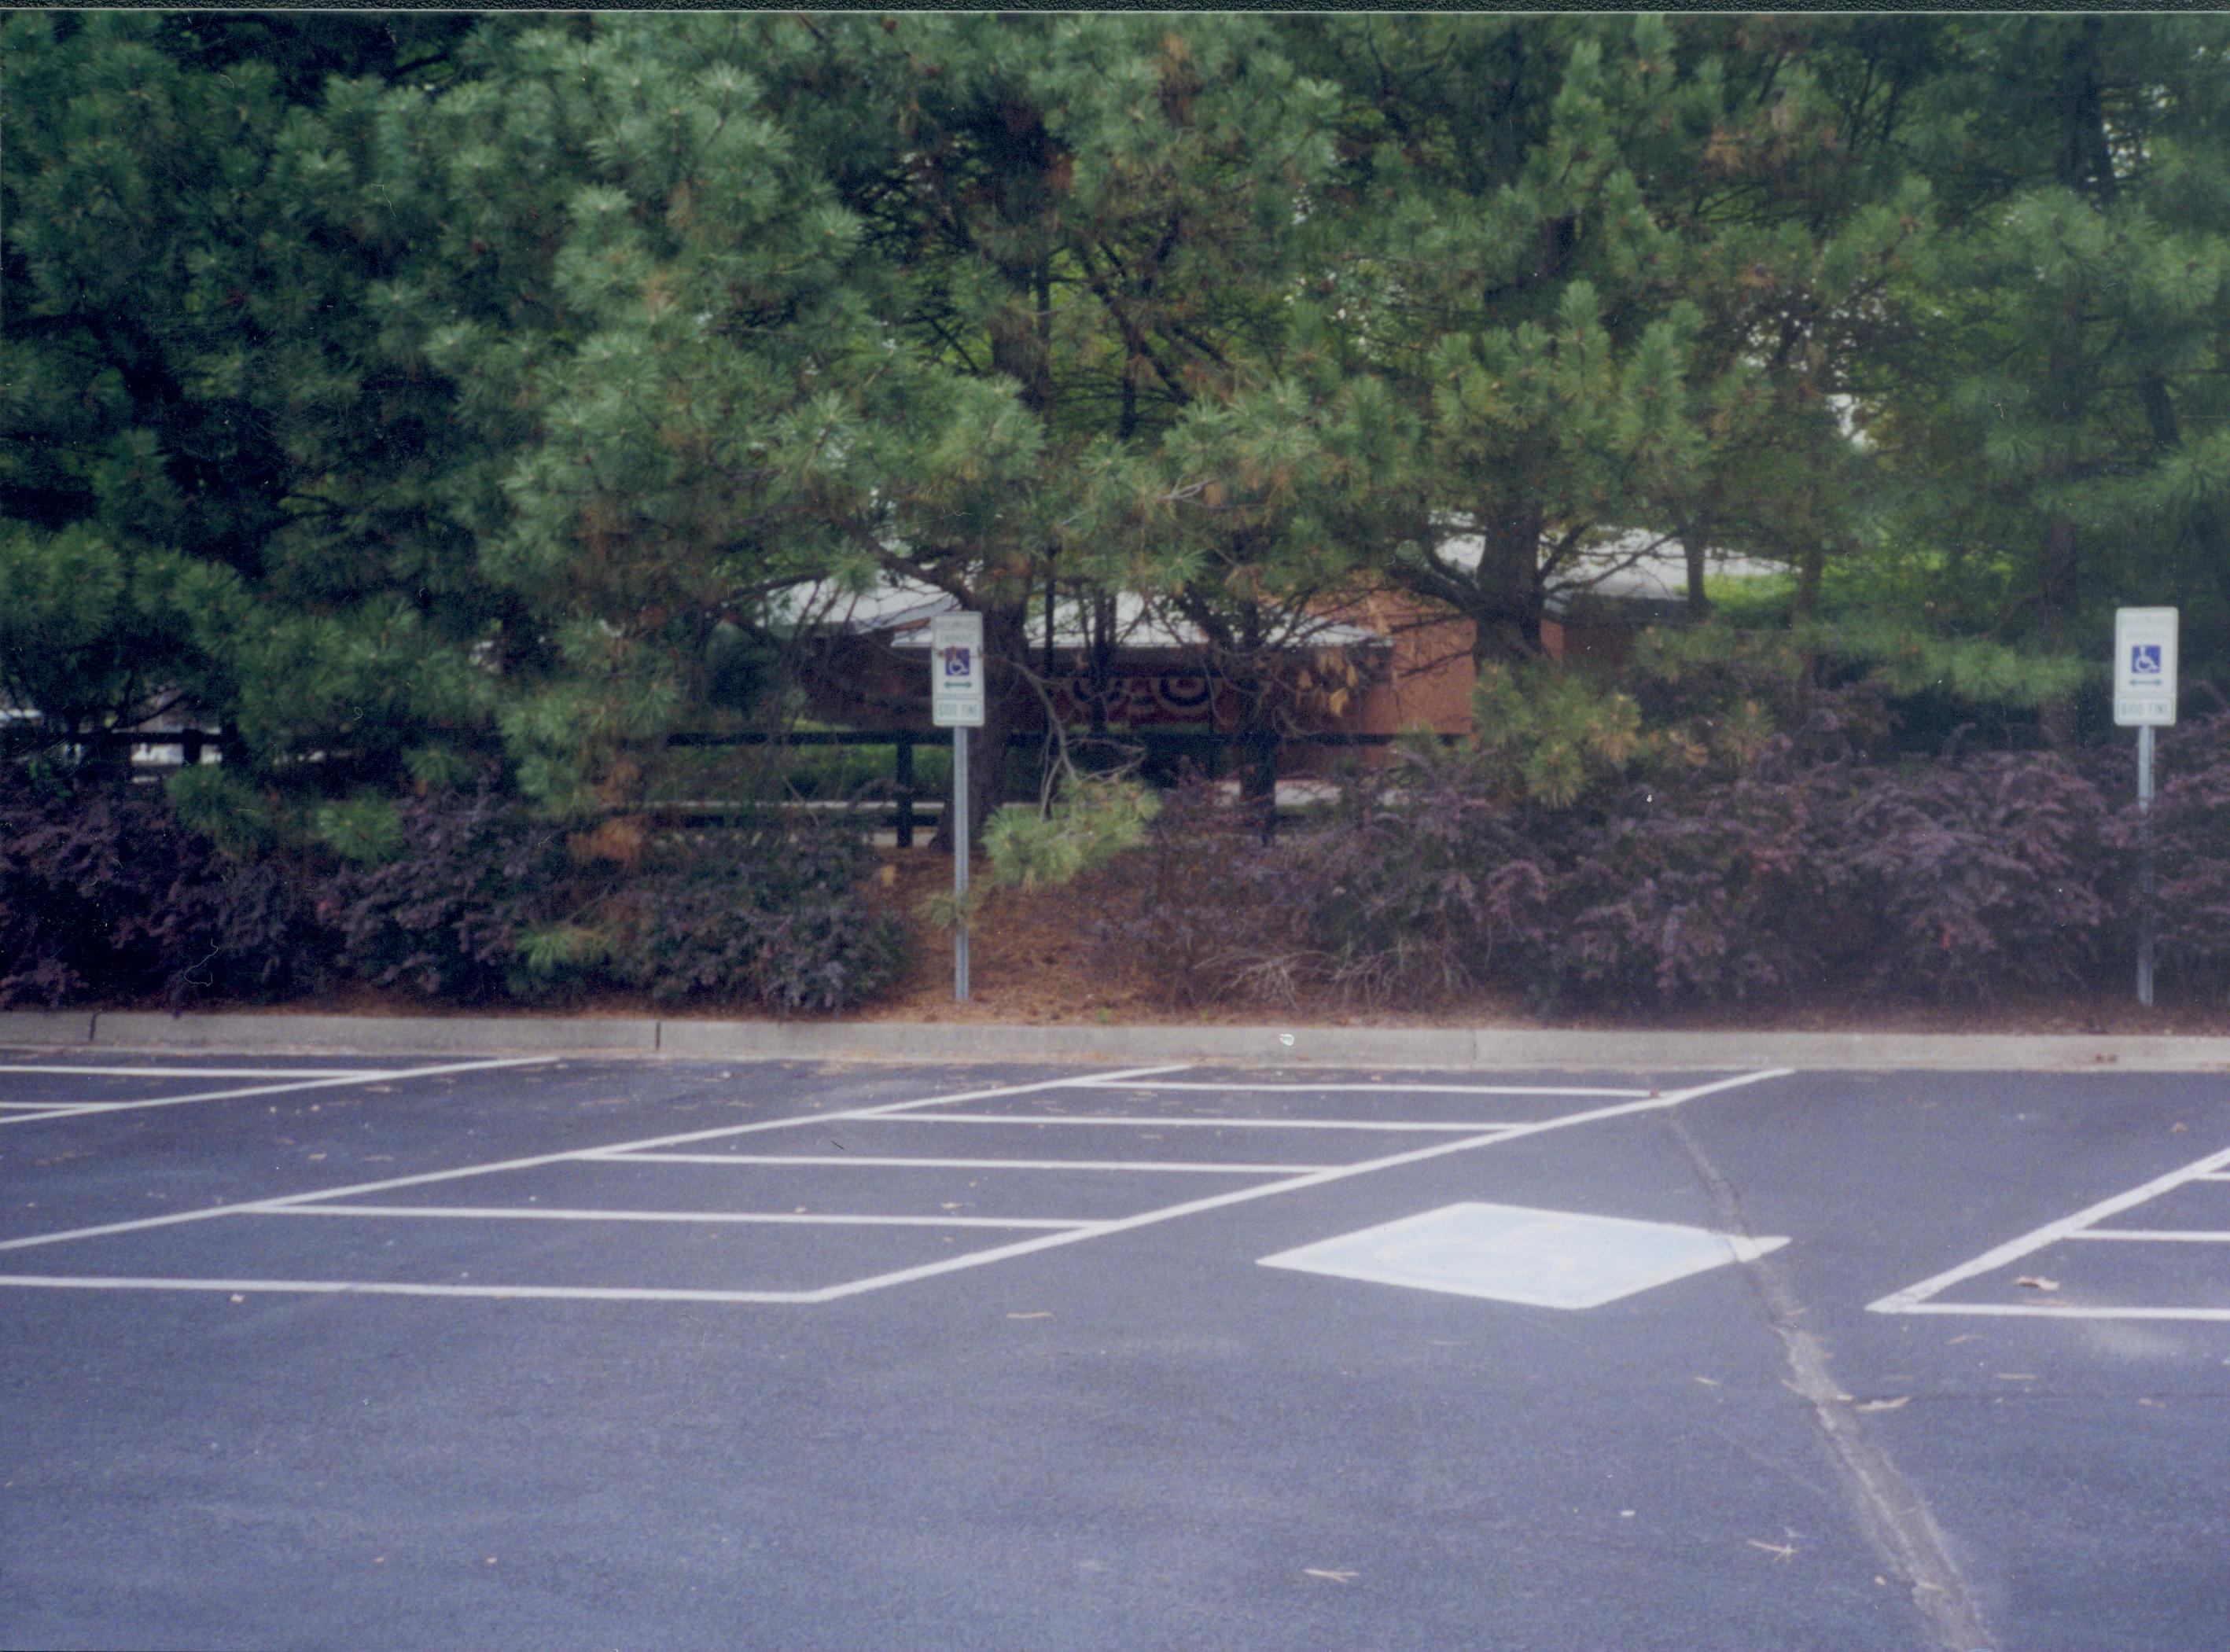 Handicapped parking spaces Lincoln Home NHS- Visitor Center, Roll 15 exp 15, 15-15 Visitor Center, parking